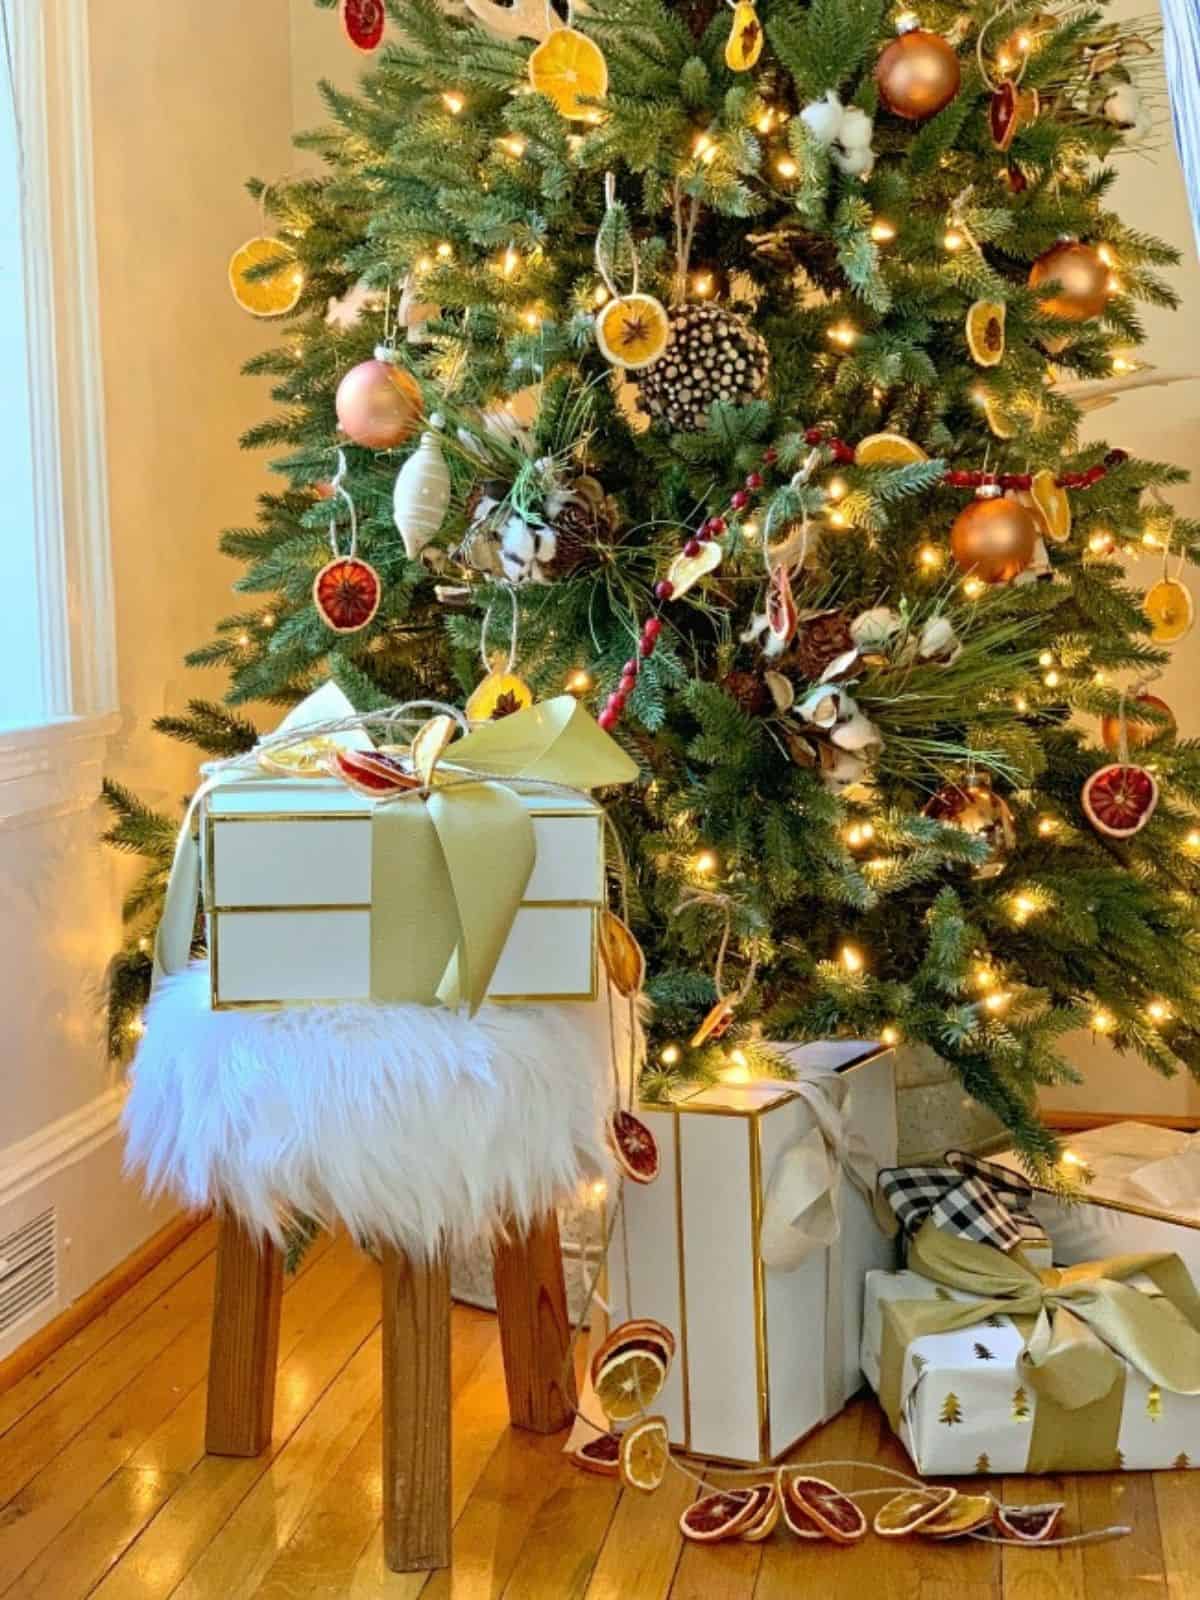 gift on stool by Christmas tree